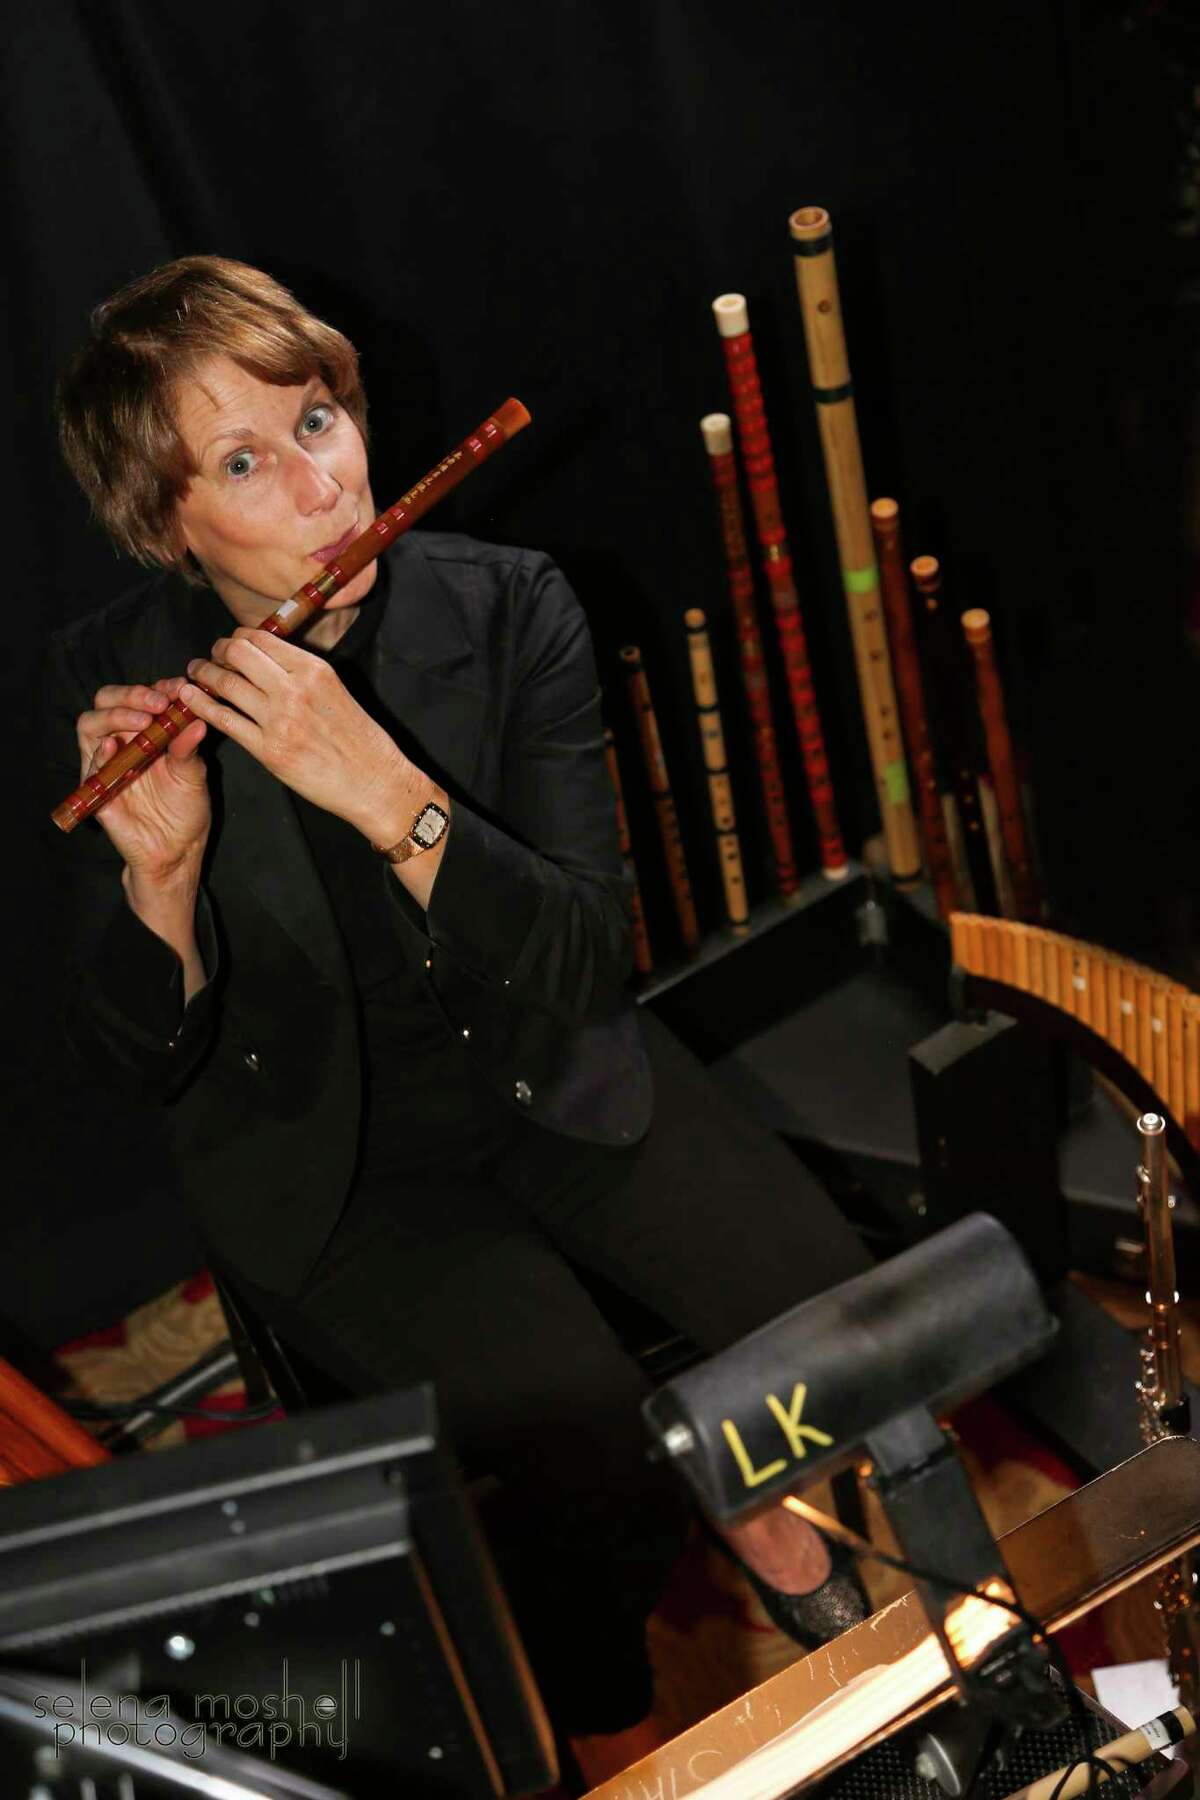 Darlene Drew plays 15 flutes for the touring production of "The Lion King."